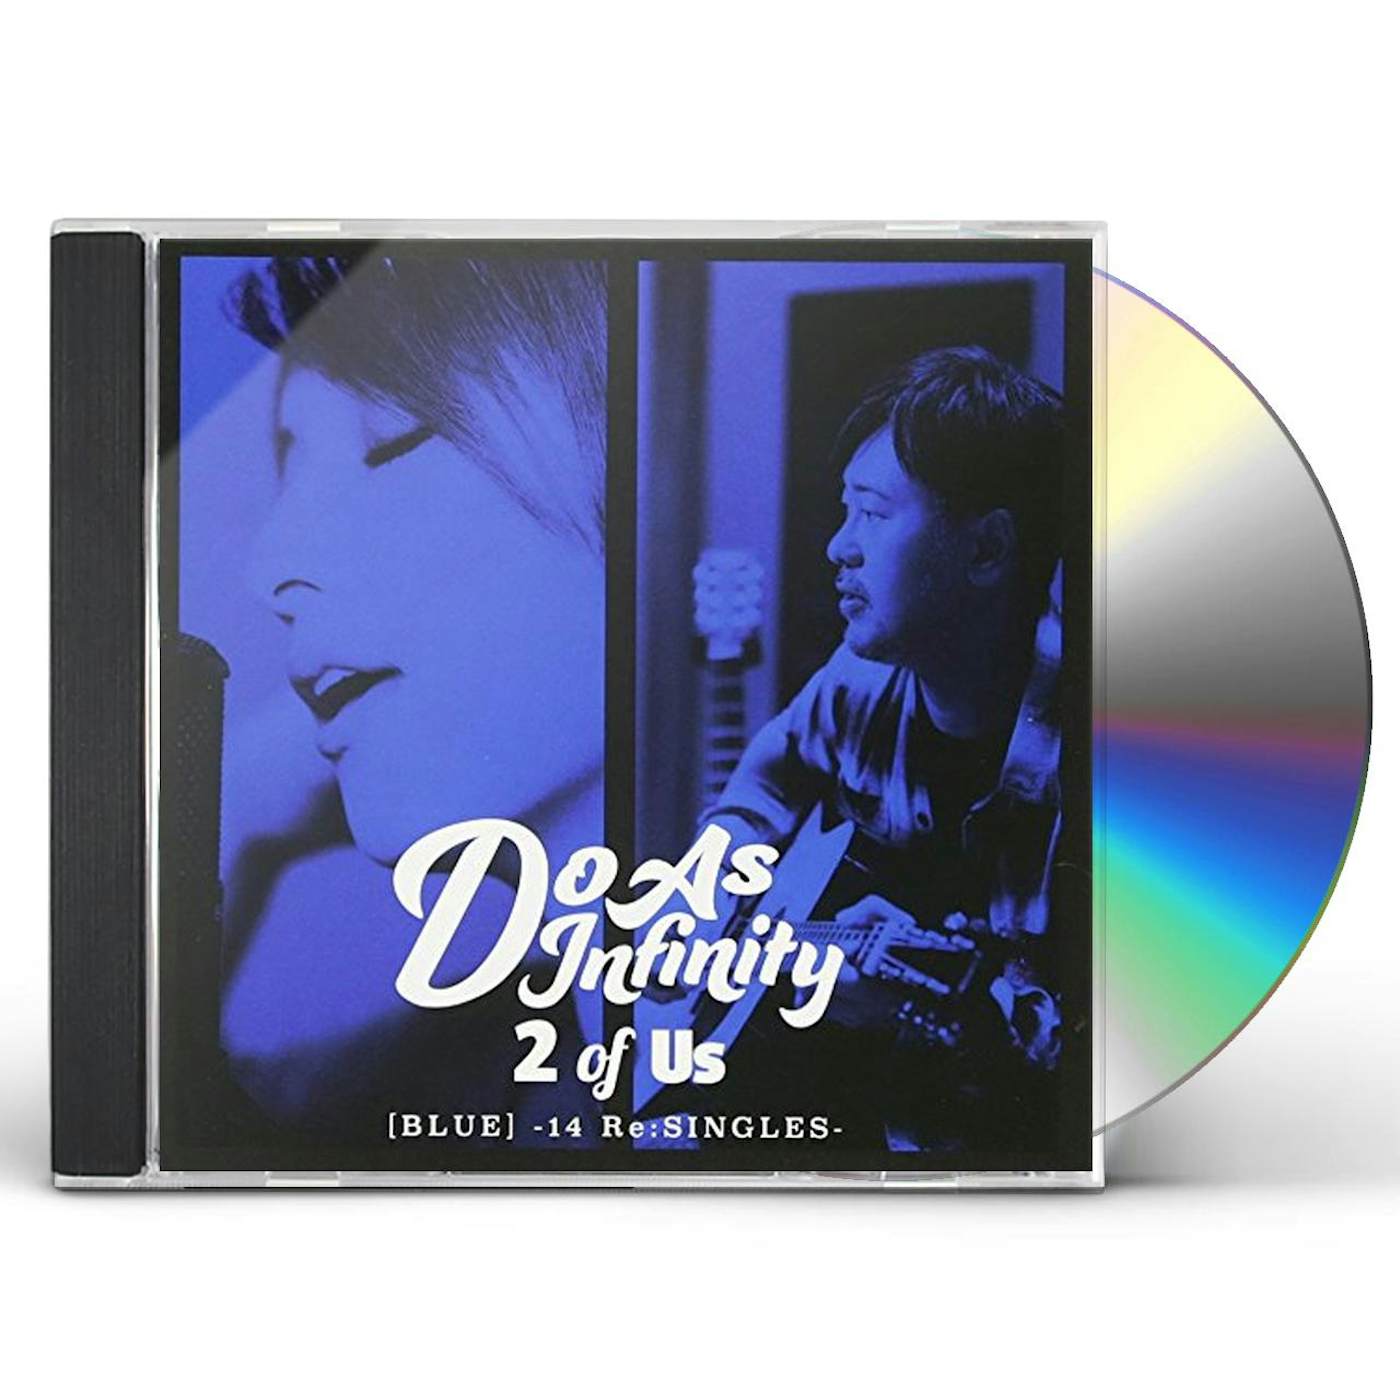 Do As Infinity 2 OF US  - 14 RE:SINGLES: DELUXE EDITION CD - Blue Vinyl